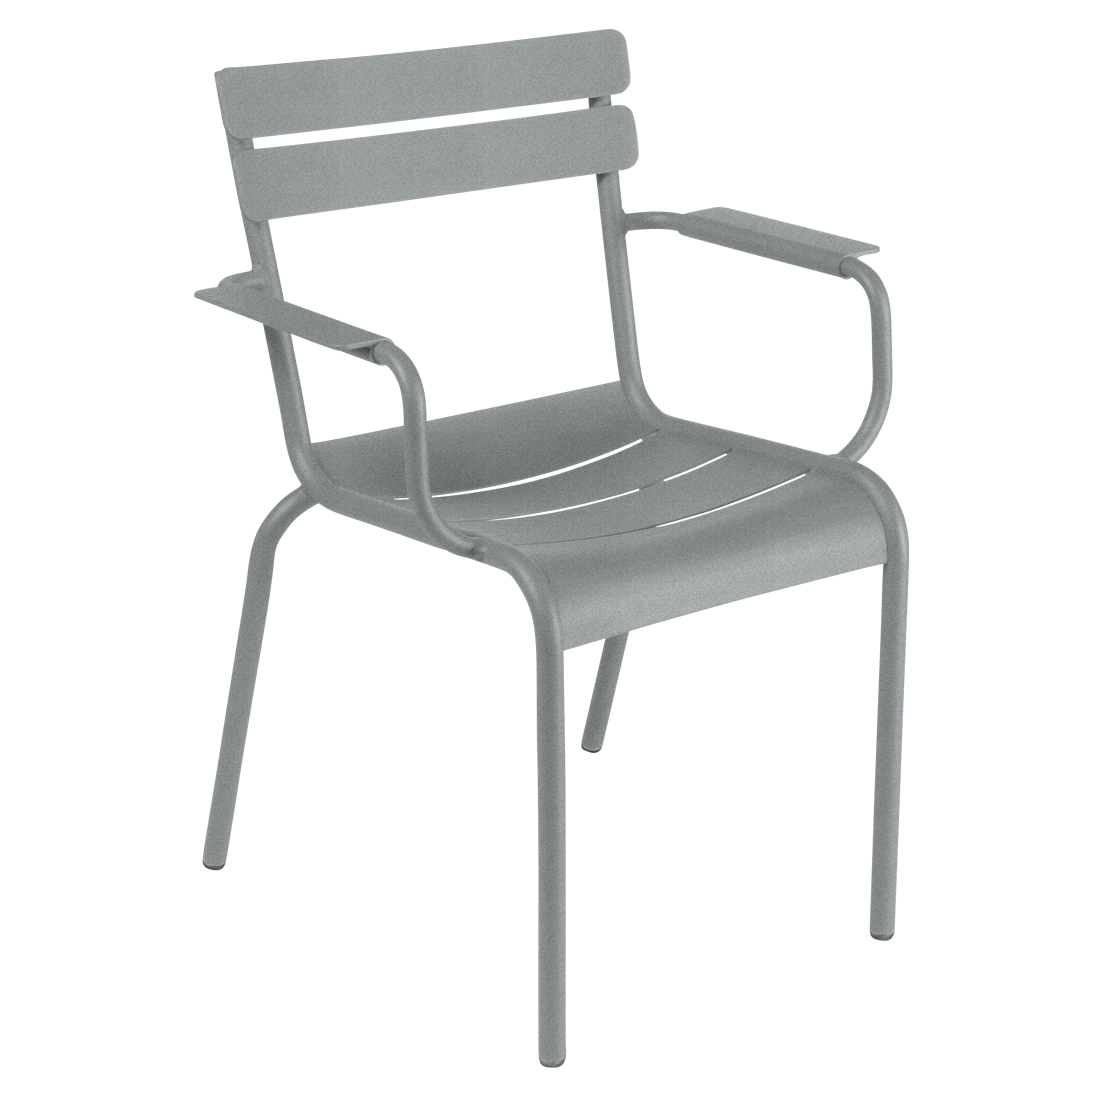 LUXEMBOURG STEEL ARMCHAIR (Exc. Cont.)